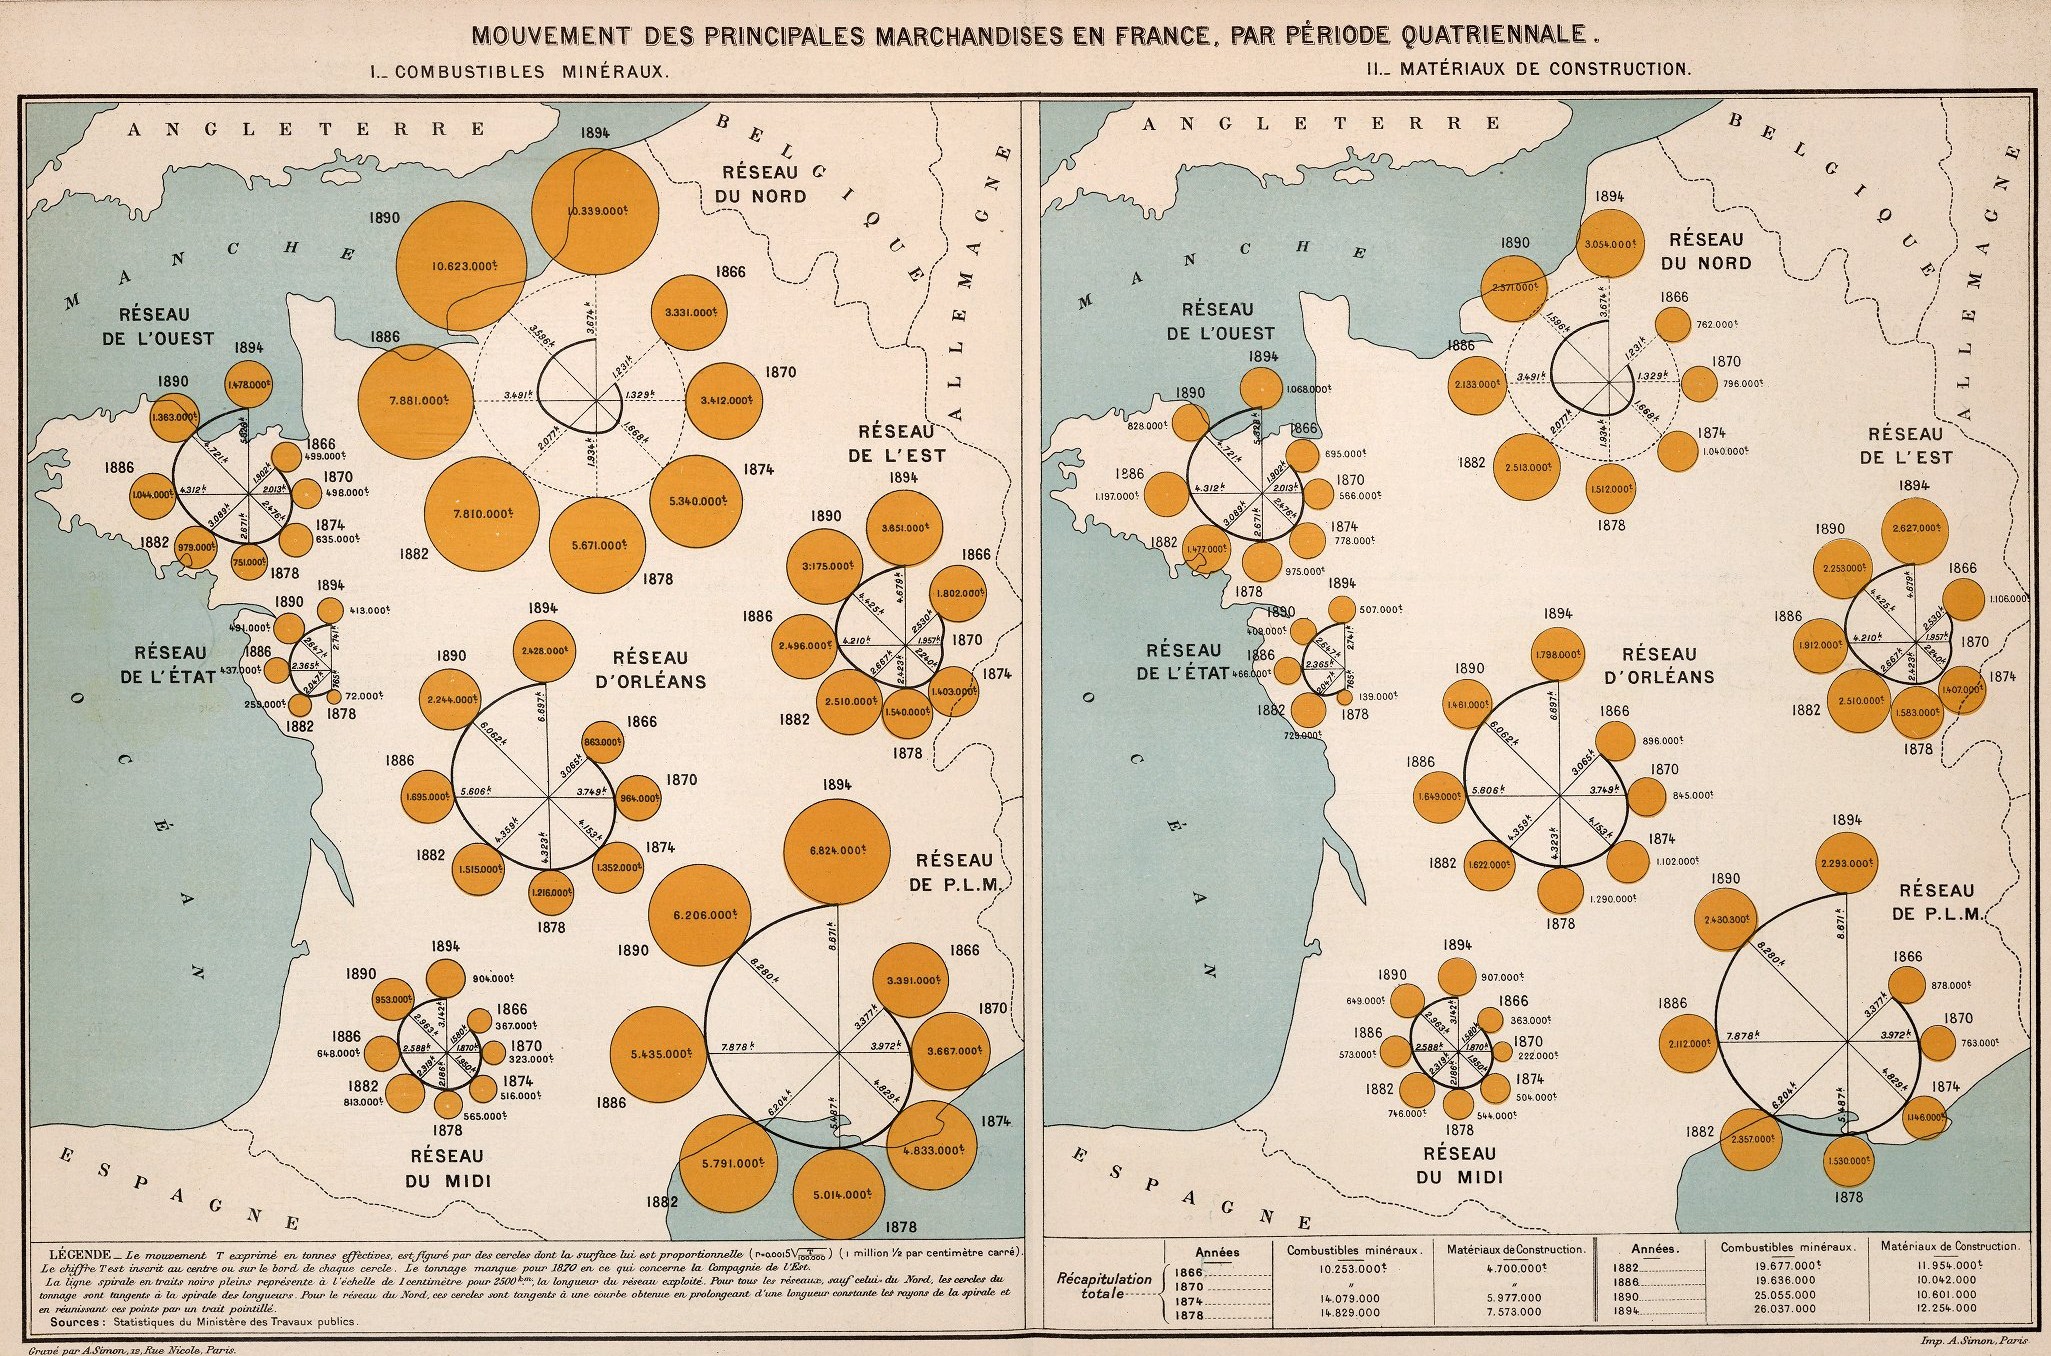 Planetary diagram: “Transportation of principal merchandise in France in four-year periods” (Mouvement des principales marchandises en France, par période quatriennale). Left: combustible minerals, for example, coal, coke; right: construction materials.